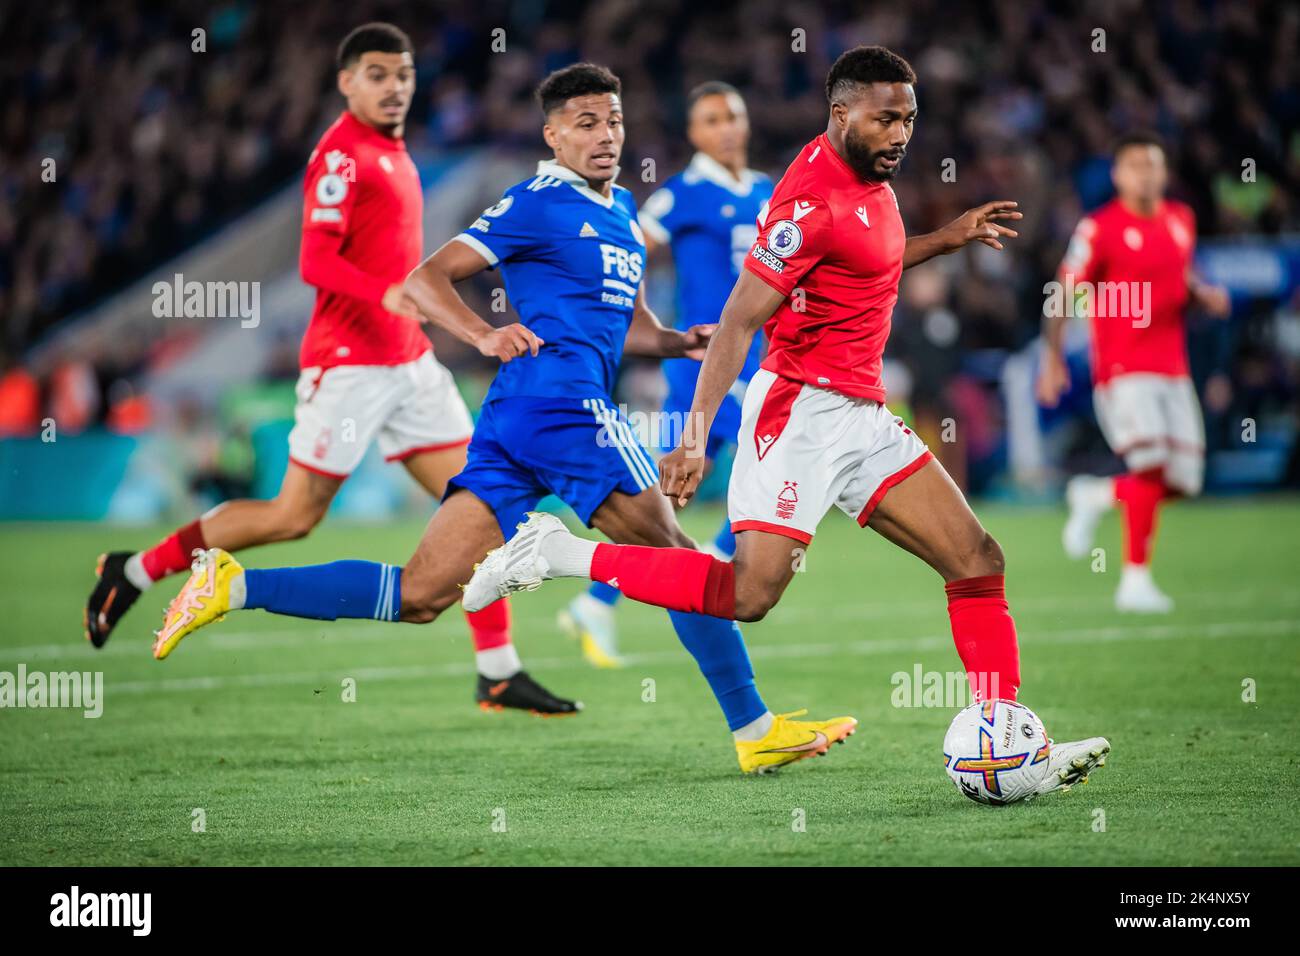 Emmanuel Dennis #25 of Nottingham Forest has a chance on goal during the Premier League match Leicester City vs Nottingham Forest at King Power Stadium, Leicester, United Kingdom, 3rd October 2022  (Photo by Ritchie Sumpter/News Images) Stock Photo